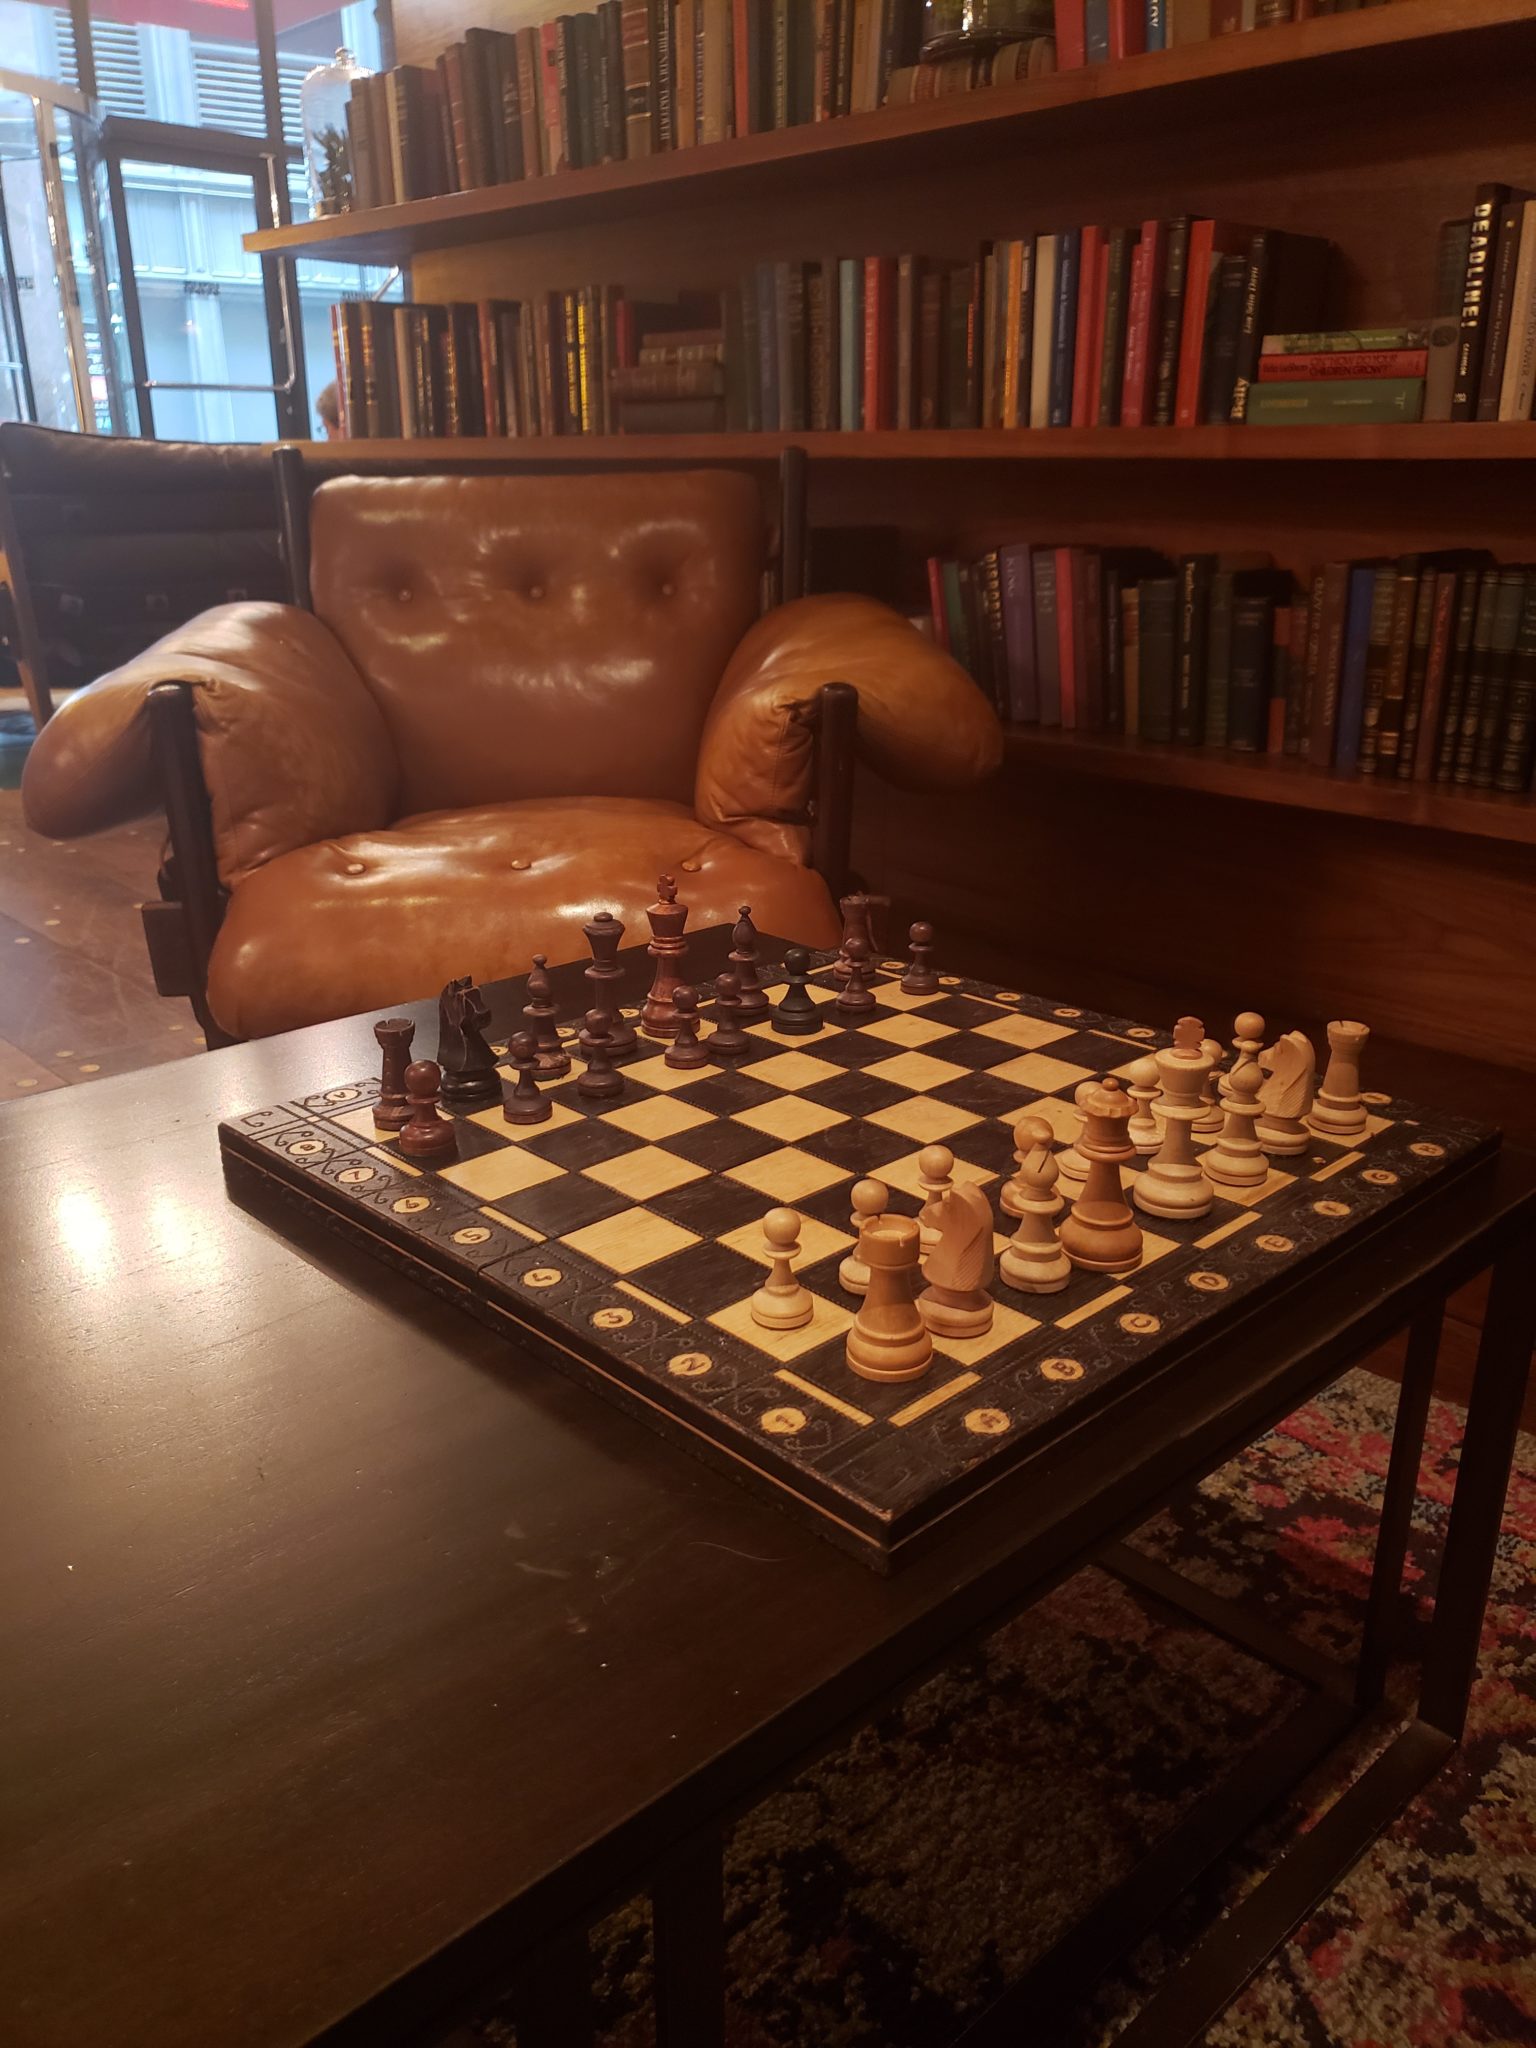 a chess board on a table in front of a leather chair